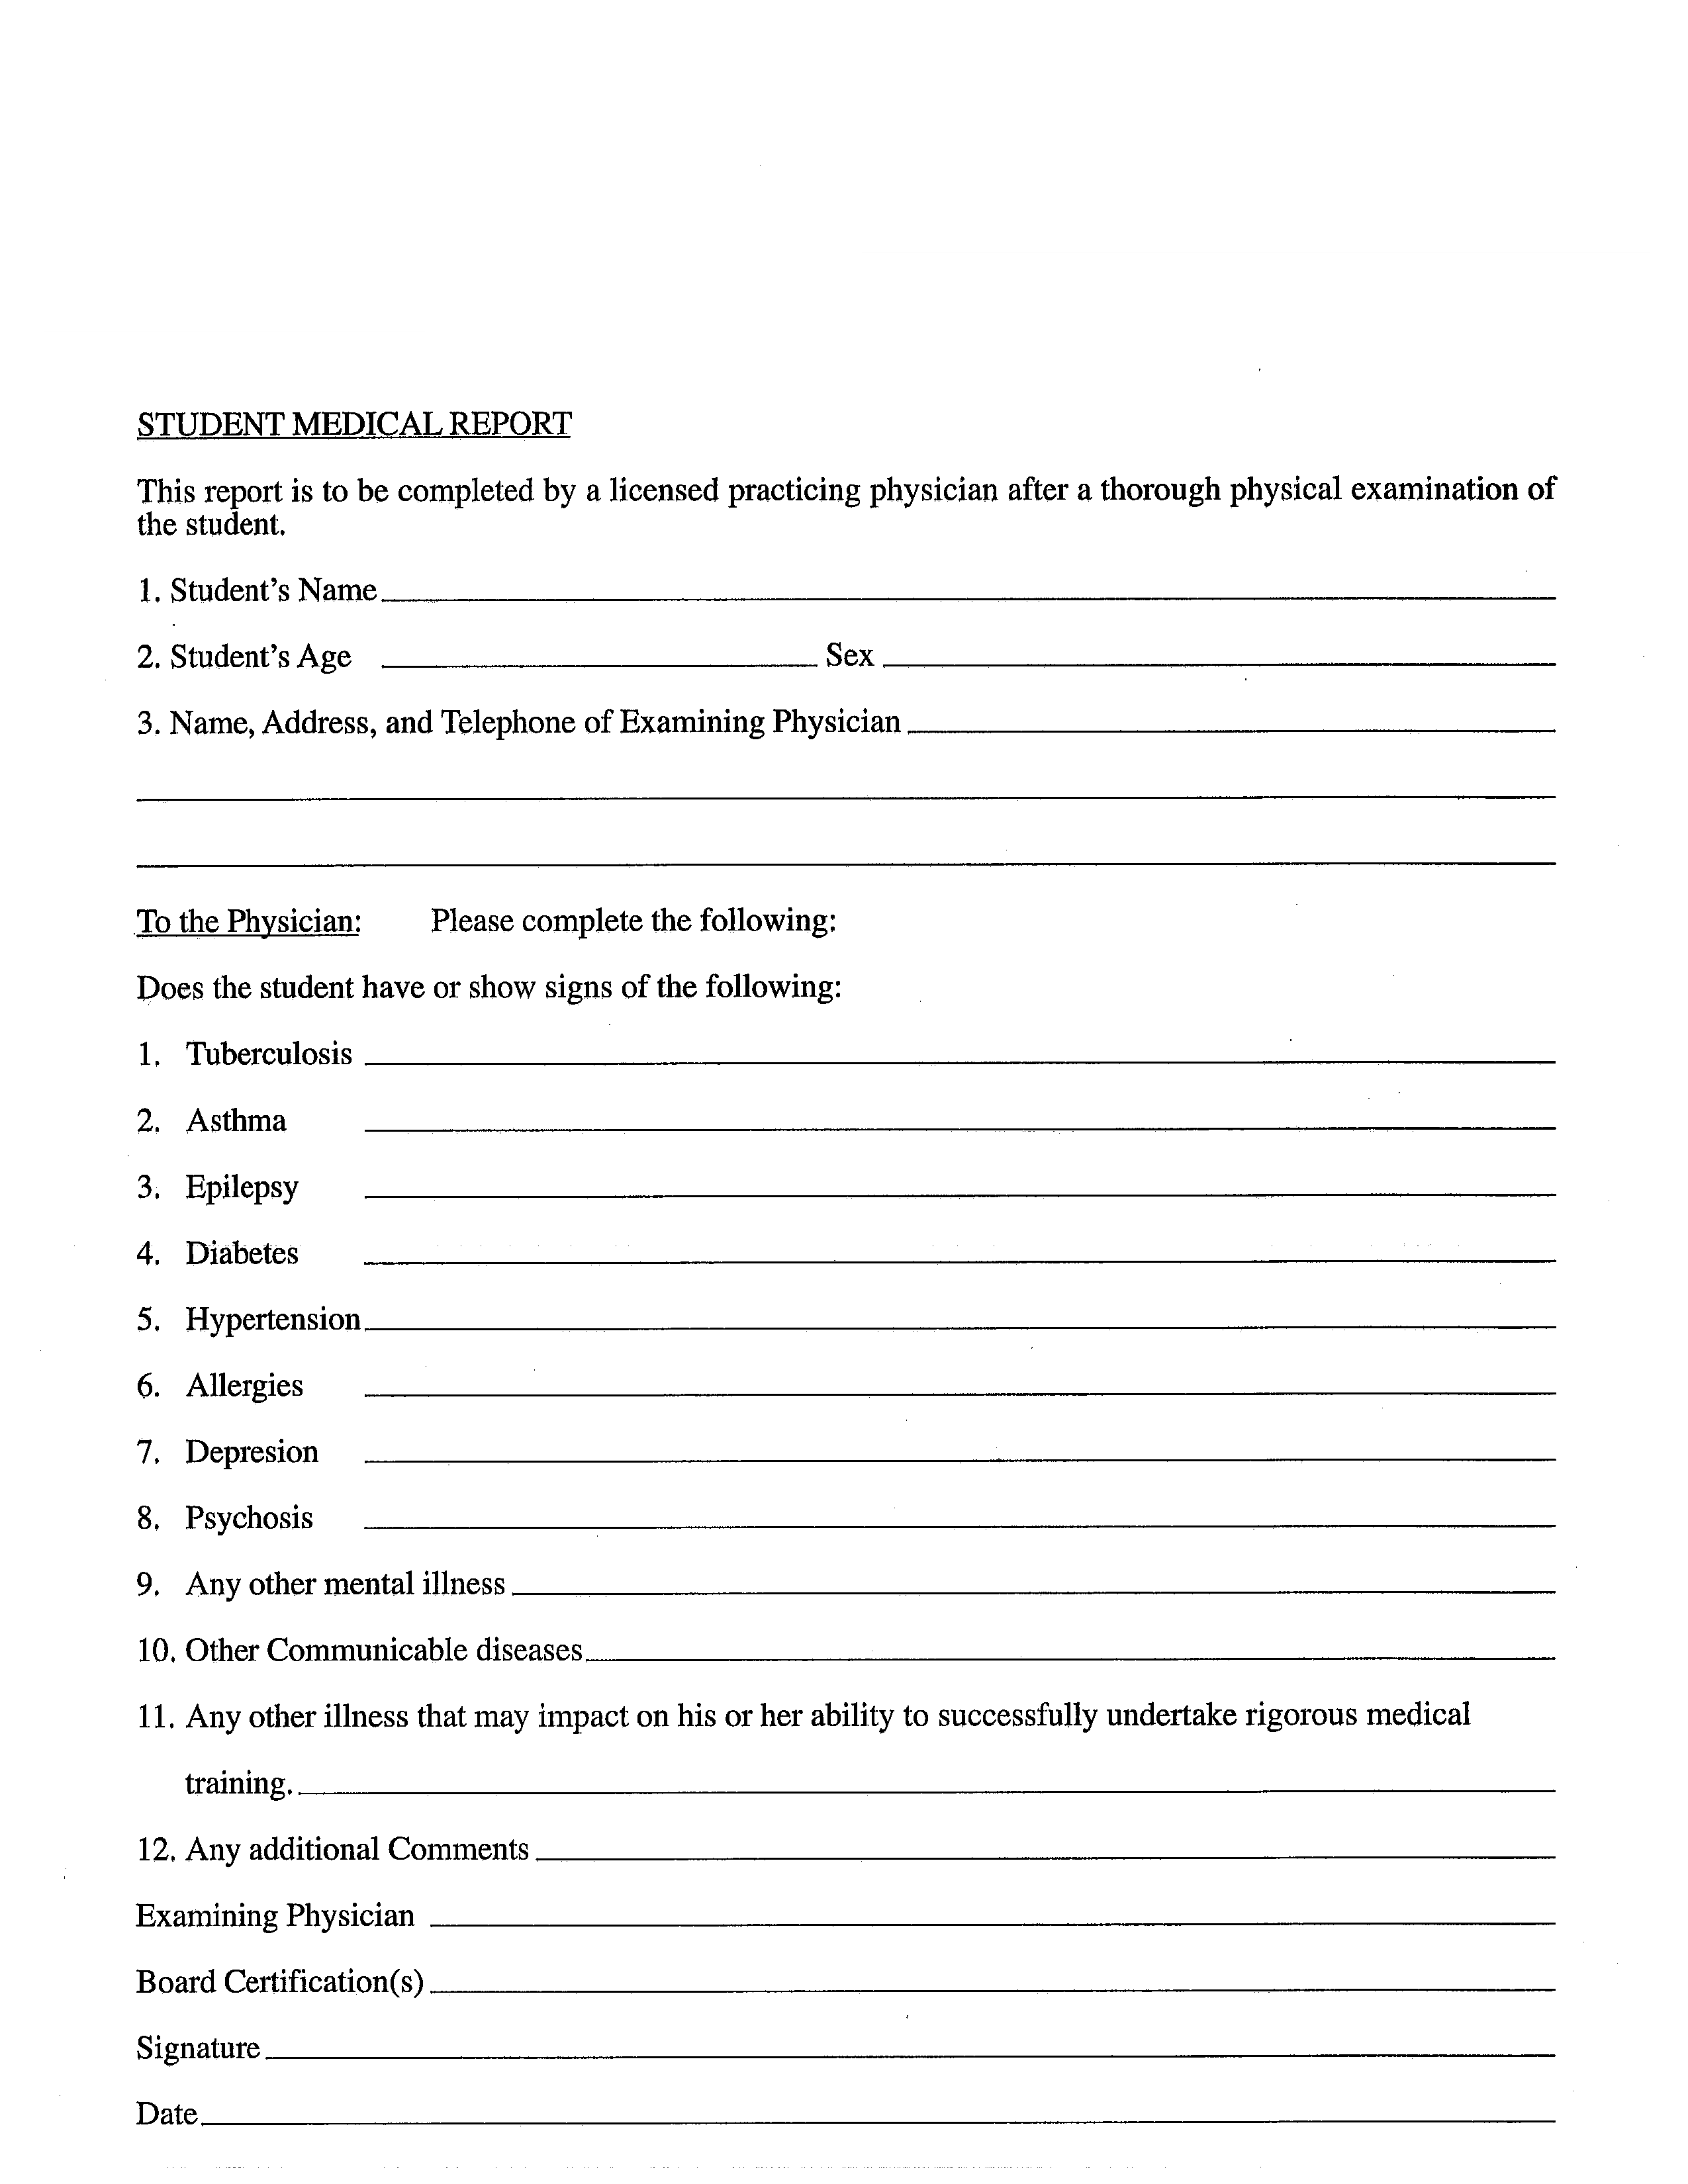 Student Medical Report Form main image